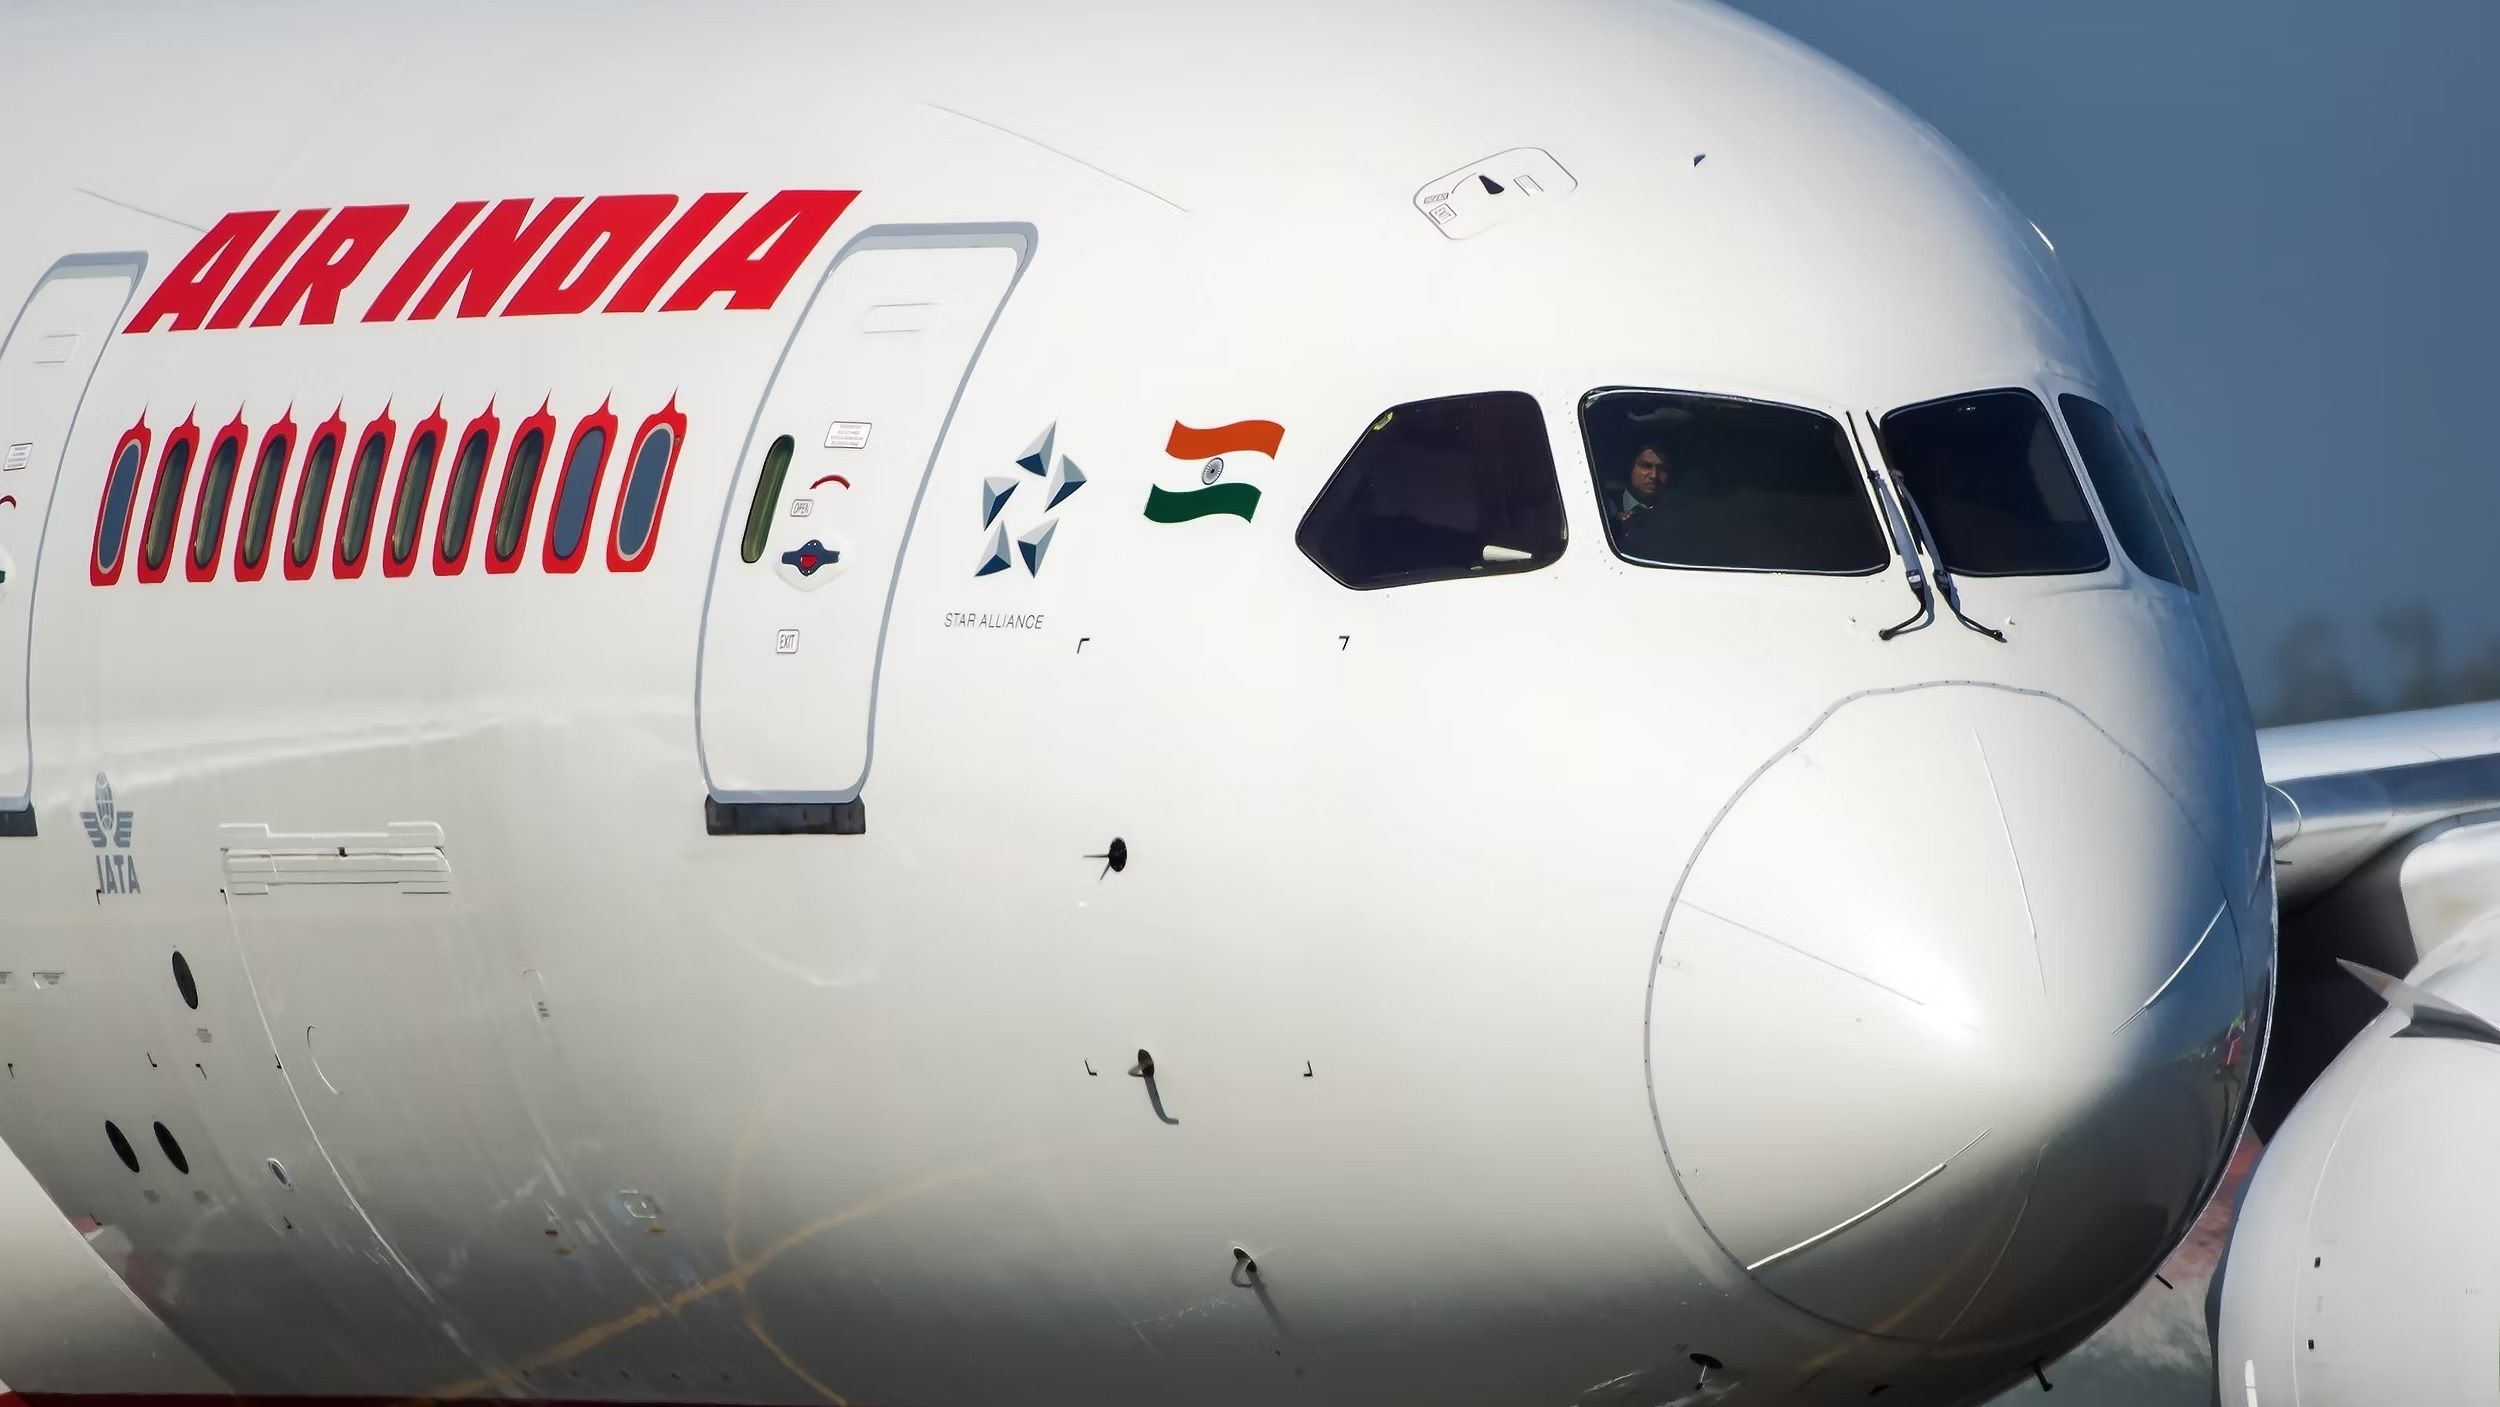 Air India Boeing 787-8 taxiing